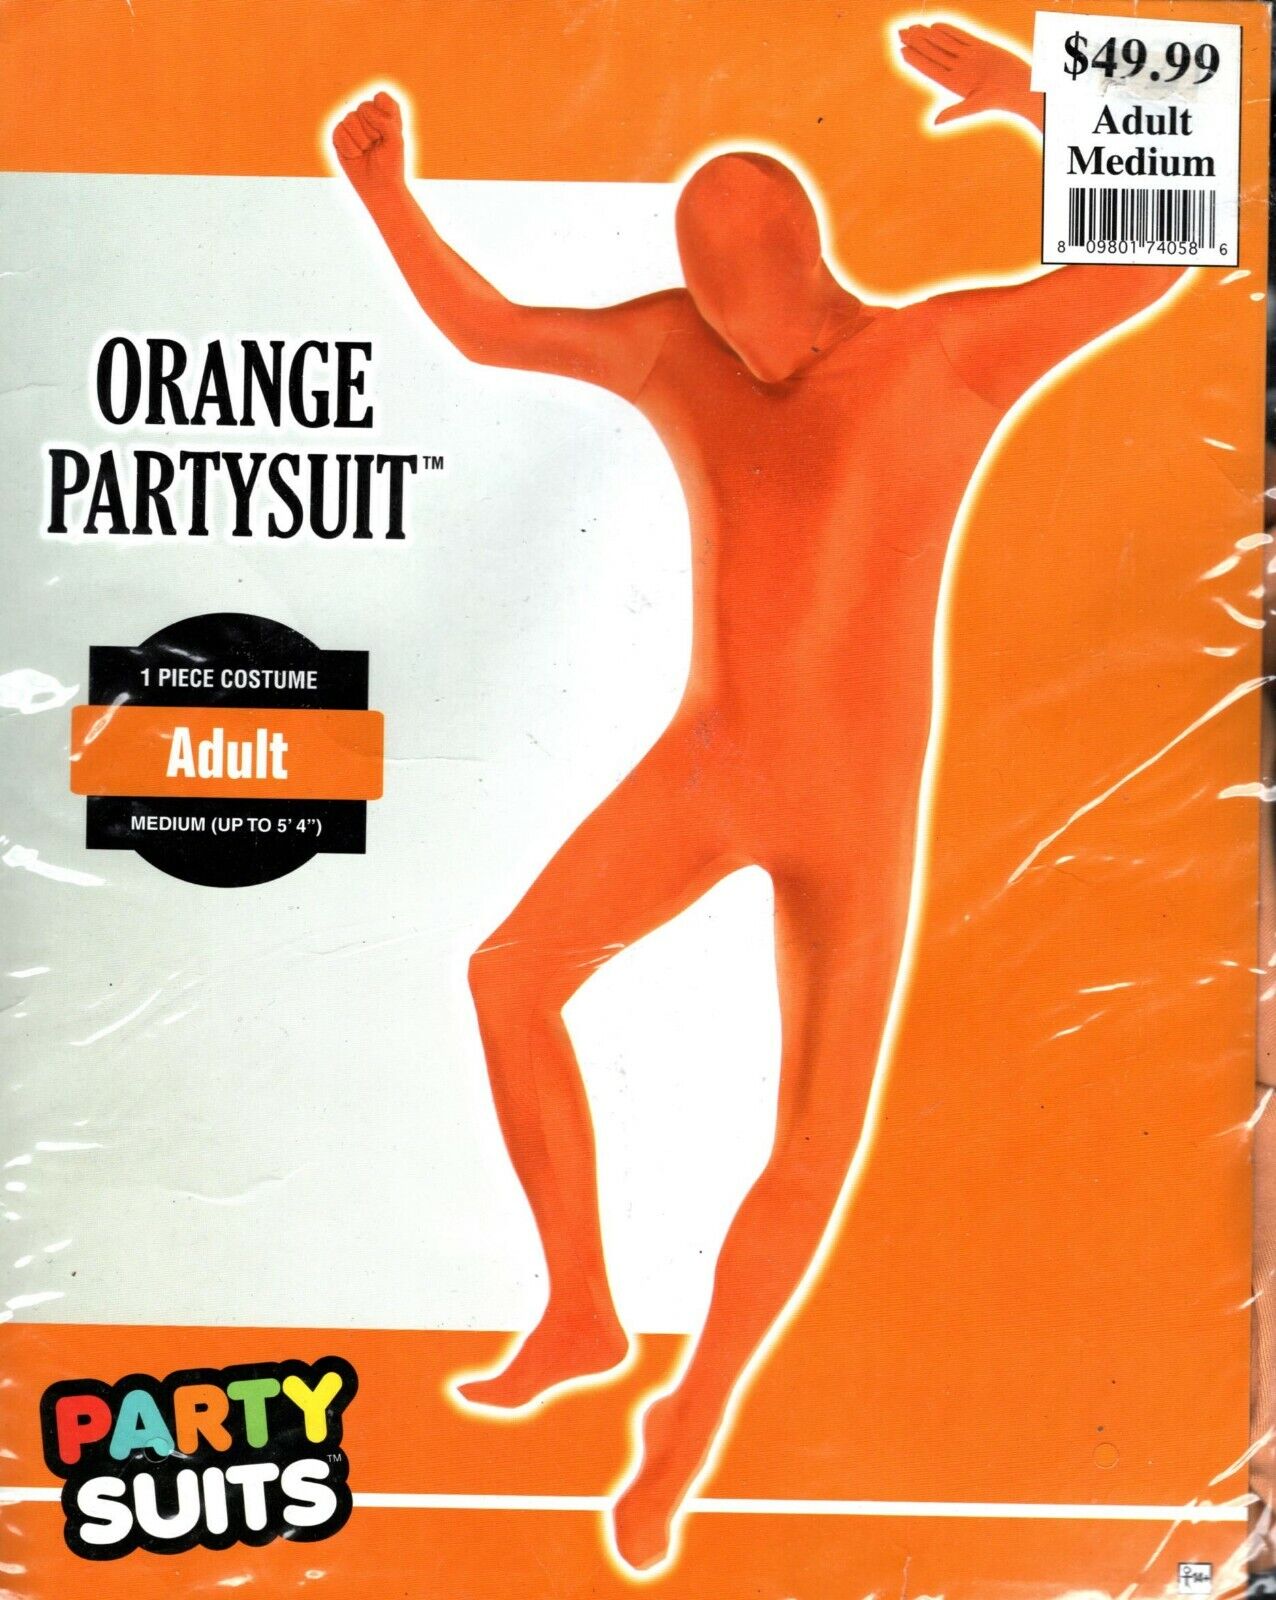 Adult Full Body Party Skin Suit Halloween Costume Orange Medium Up To 5'4" Party